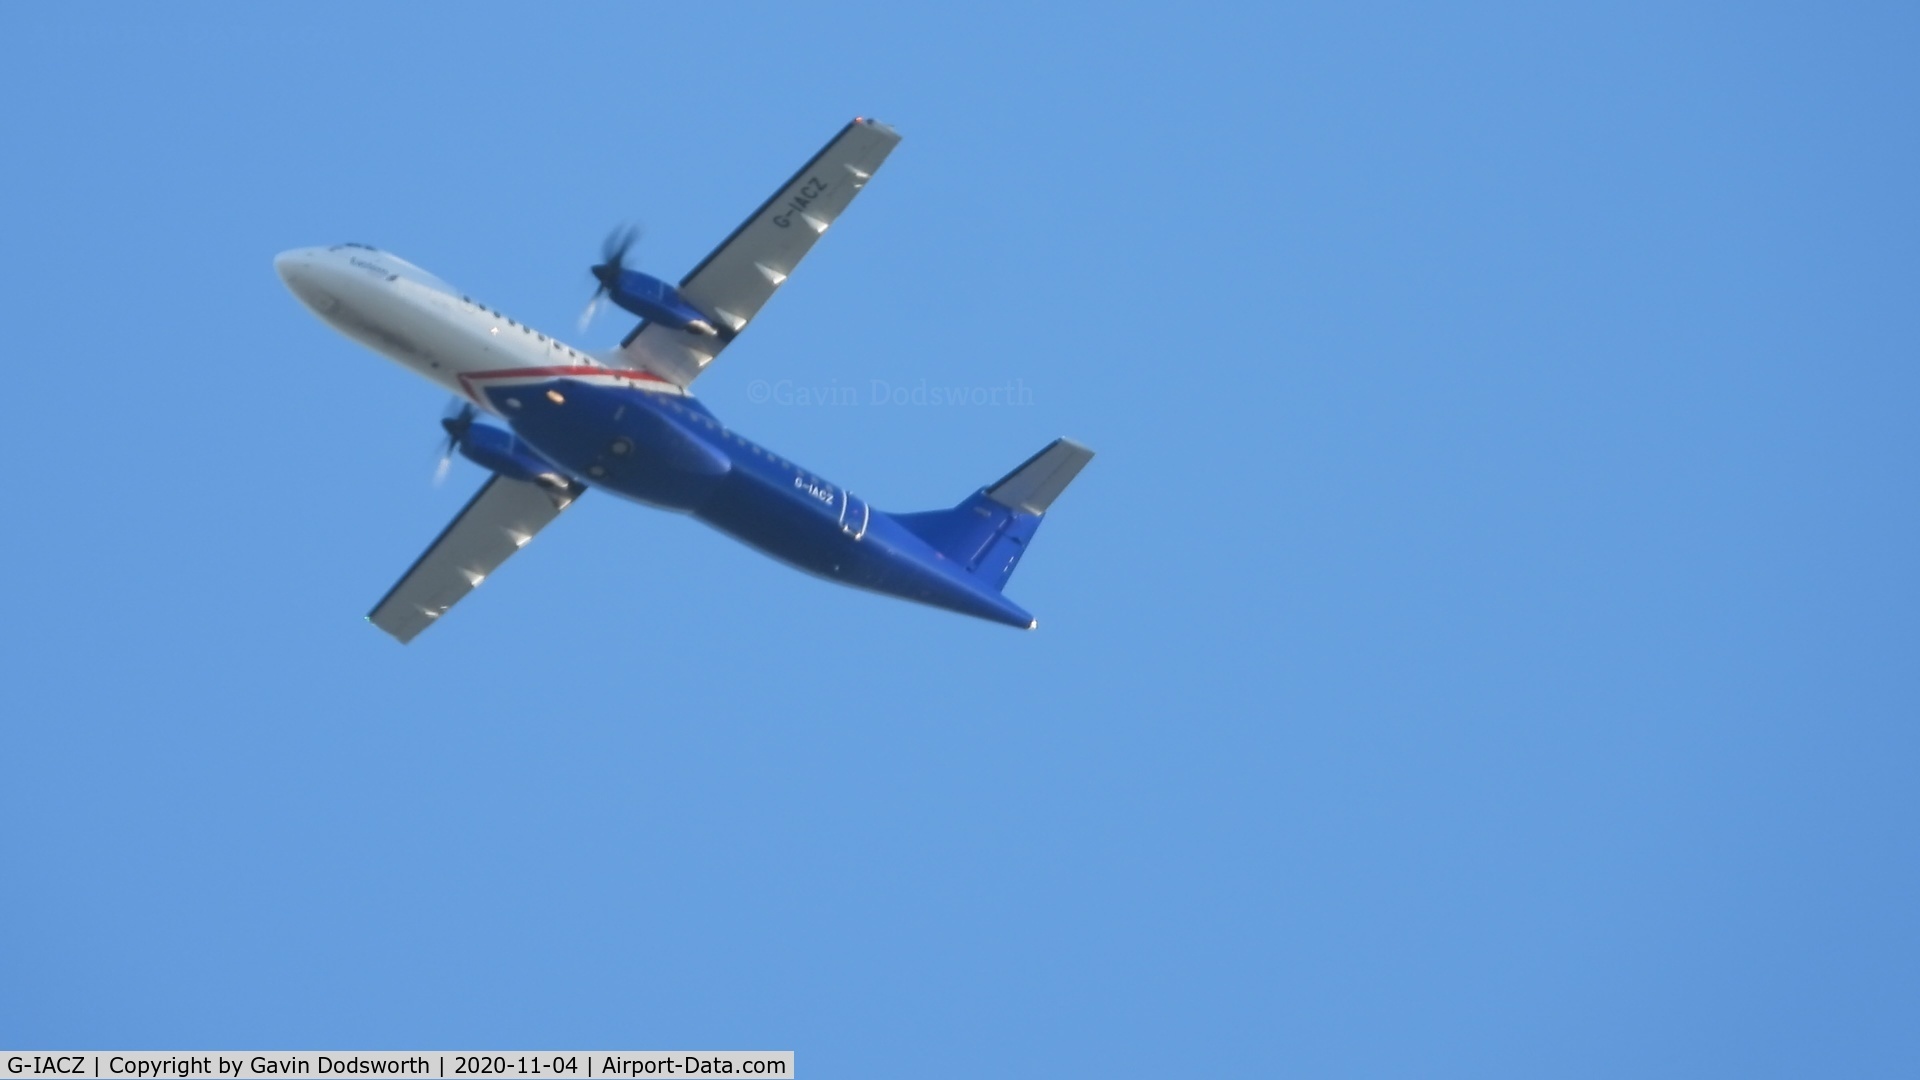 G-IACZ, 2018 ATR 72-212A C/N 1482, Flying over Darlington on October 4th inbound to Teesside International from Southampton